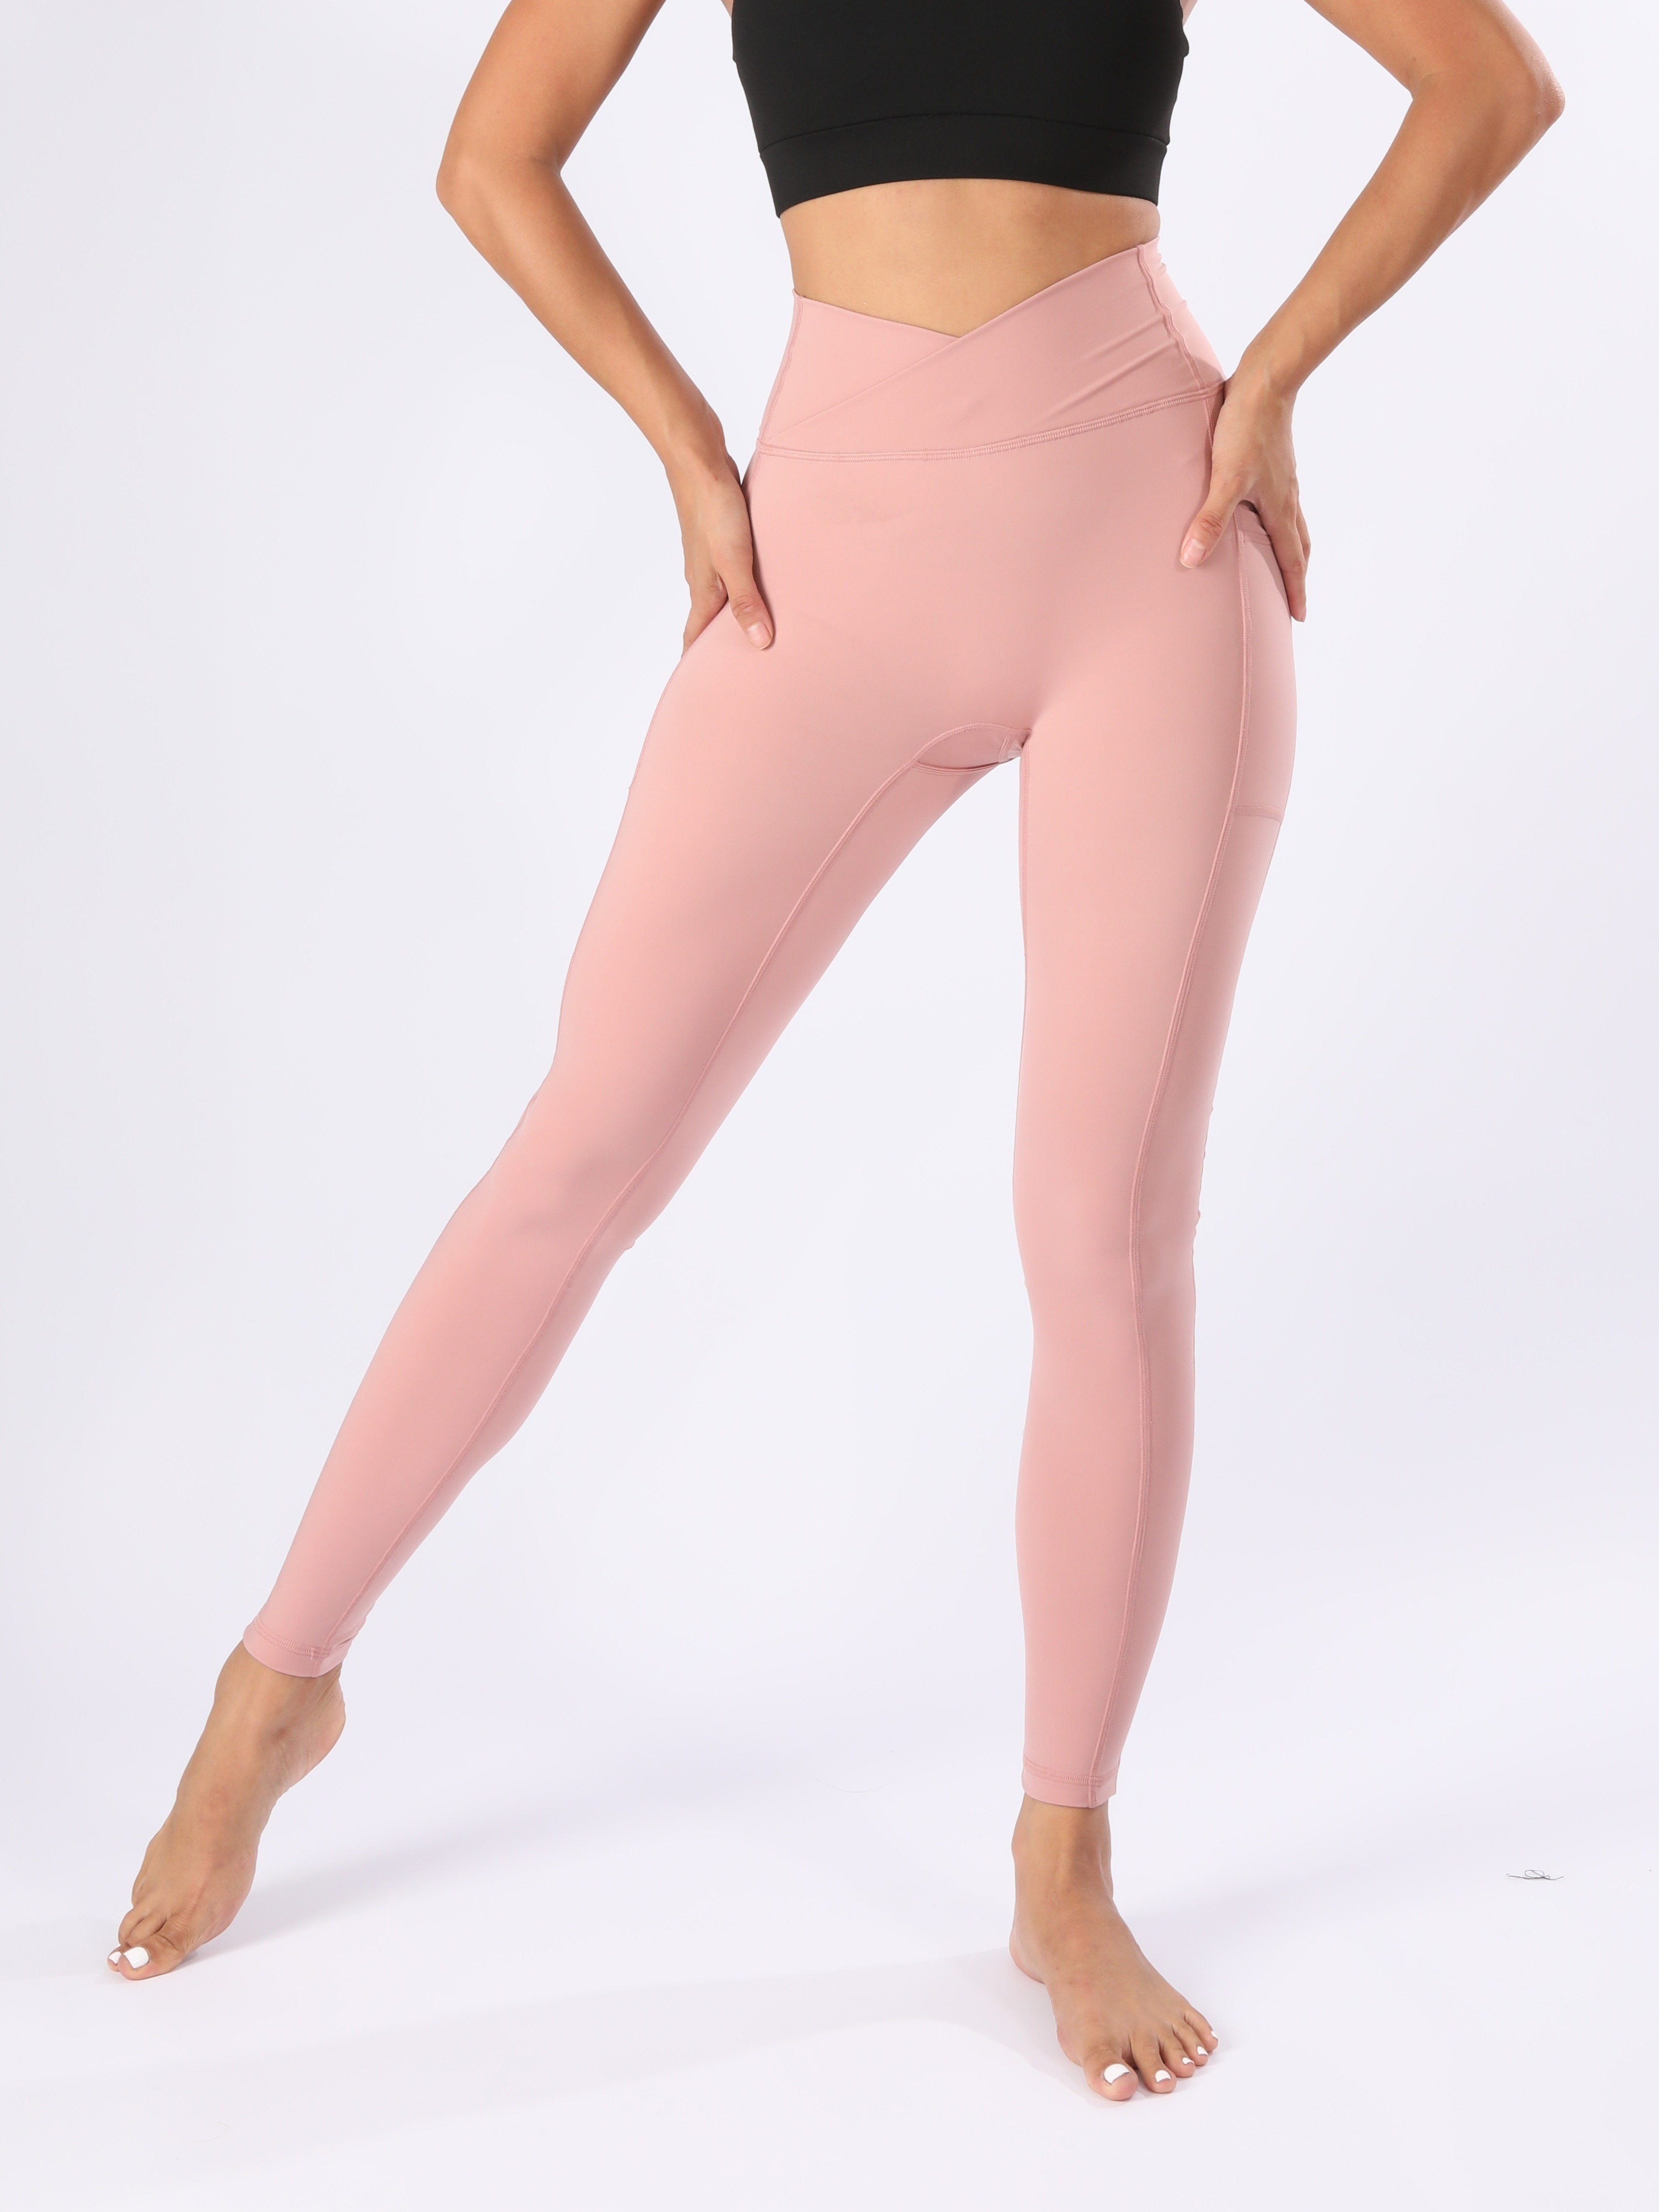 Clearance Stretchy Women's High Waisted Elasticity Ninth Pants Show Thin  Leggings Tummy Control Hot Pink M 